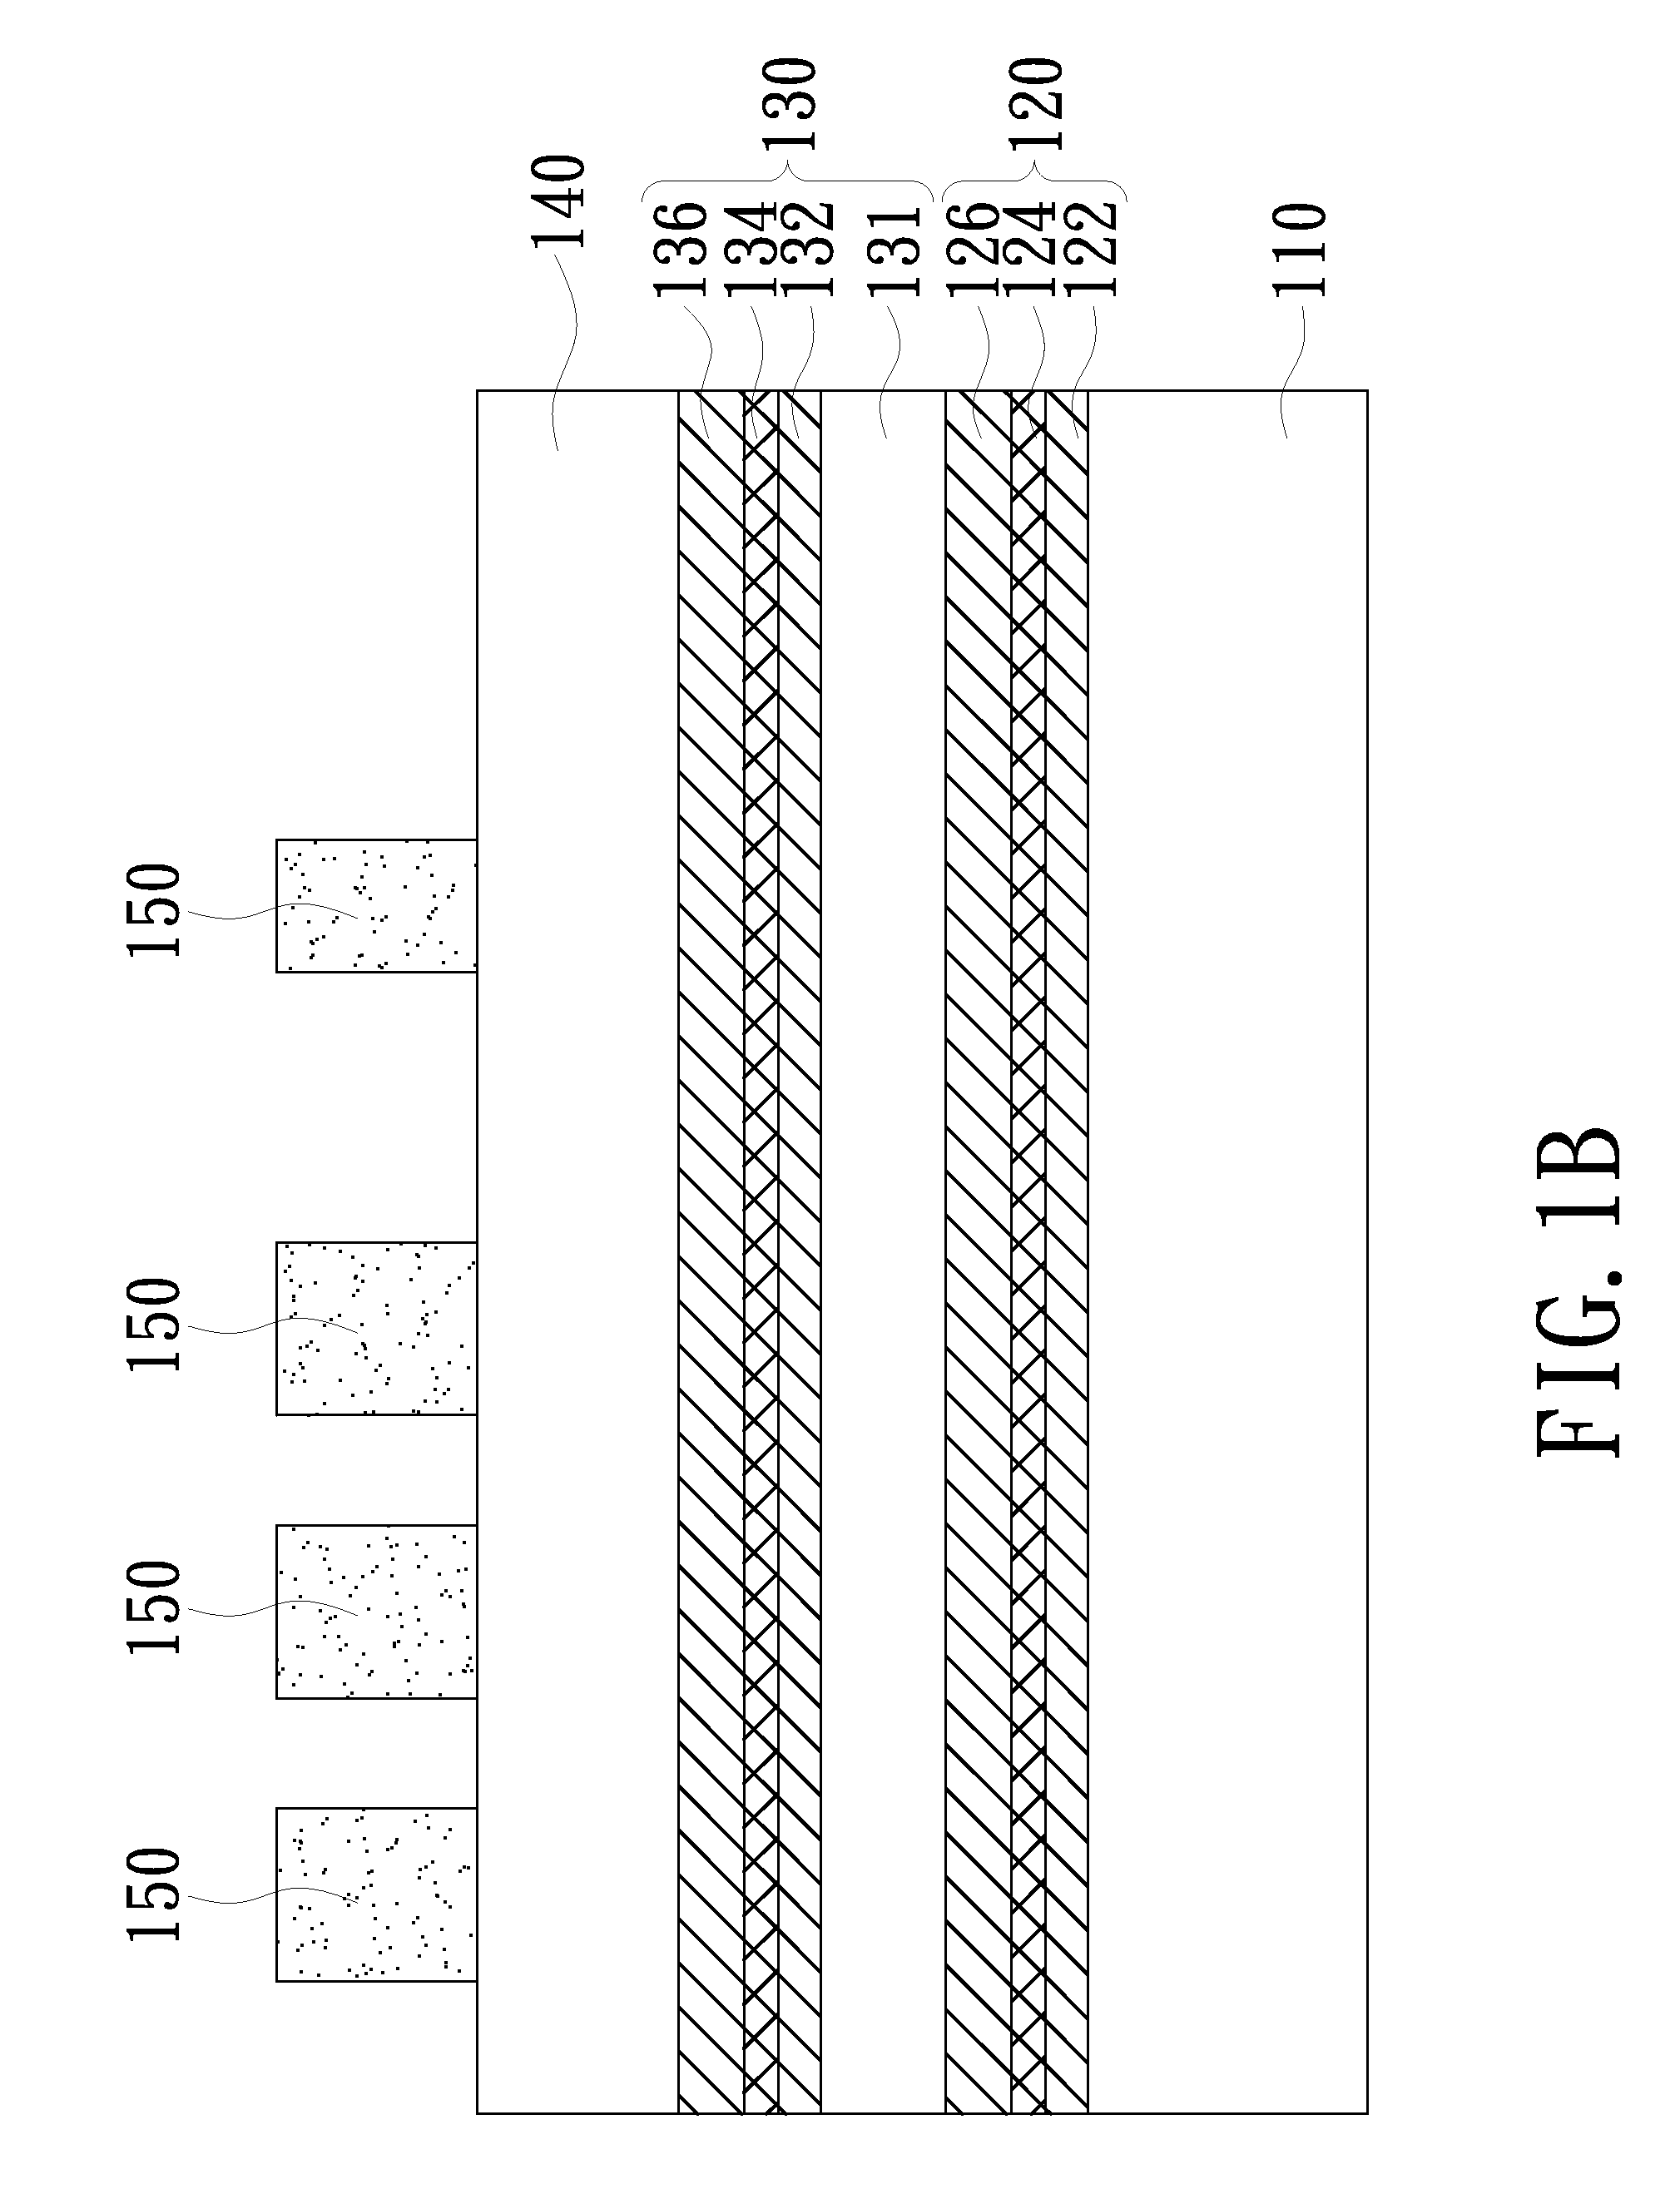 Method for manufacturing finFET